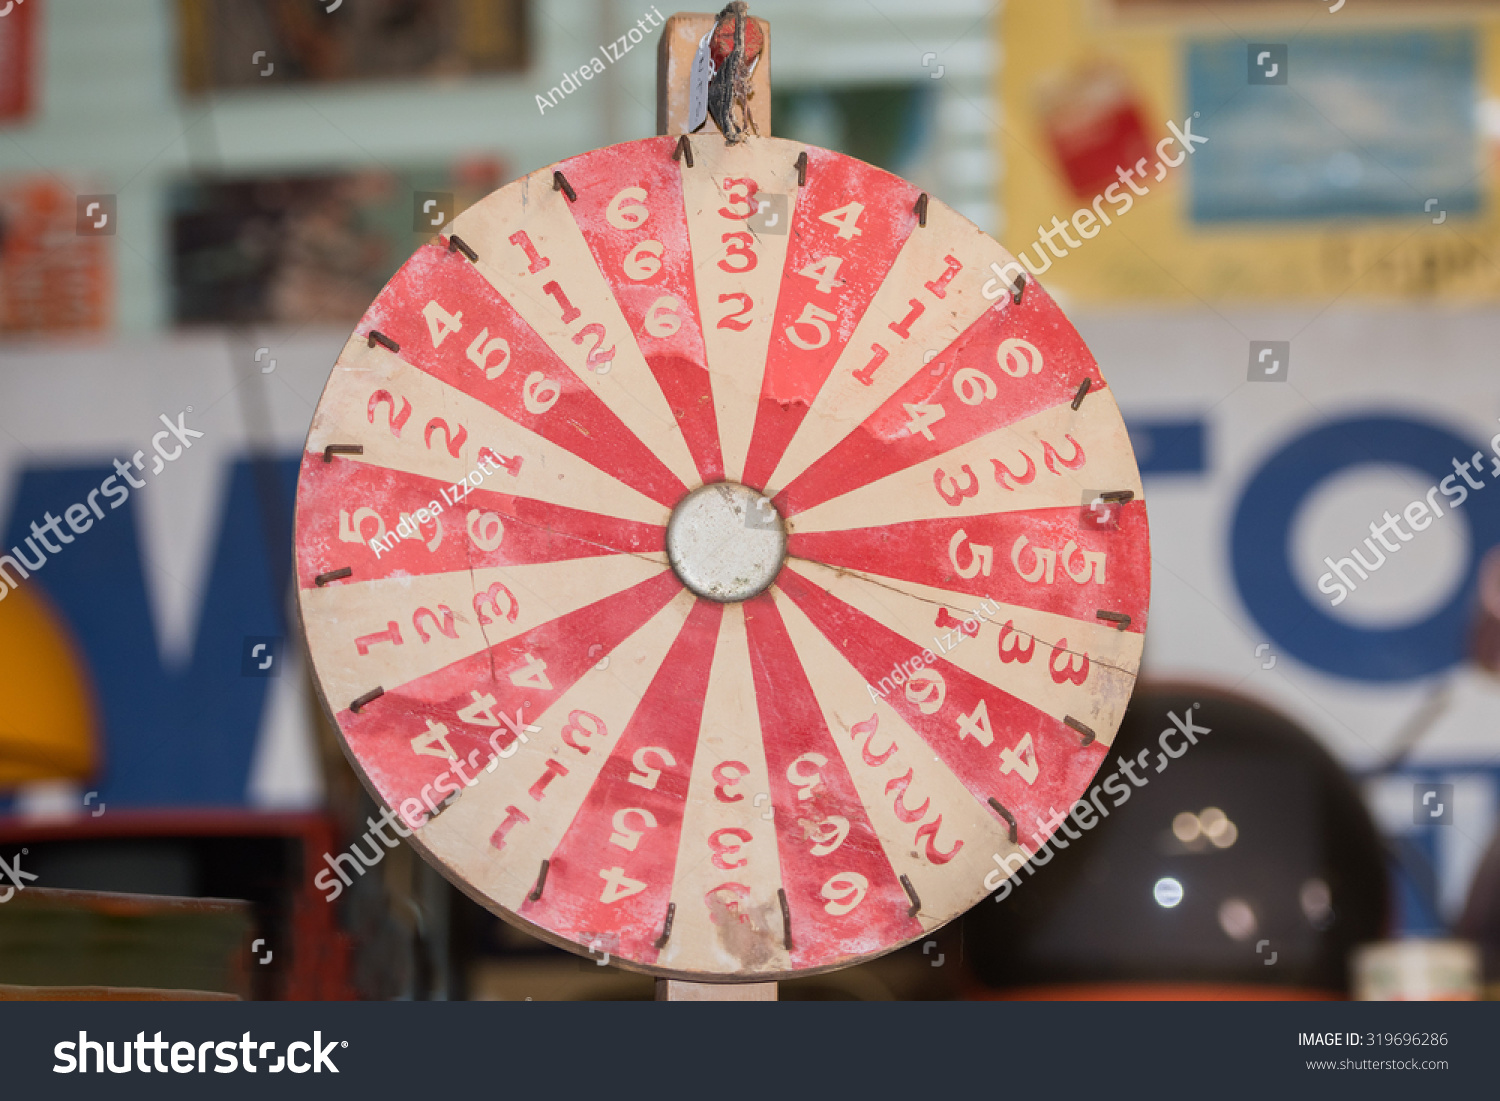 Antique Wood Ancient Wheel Fortune Stock Photo 319696286 - Shutterstock1500 x 1101